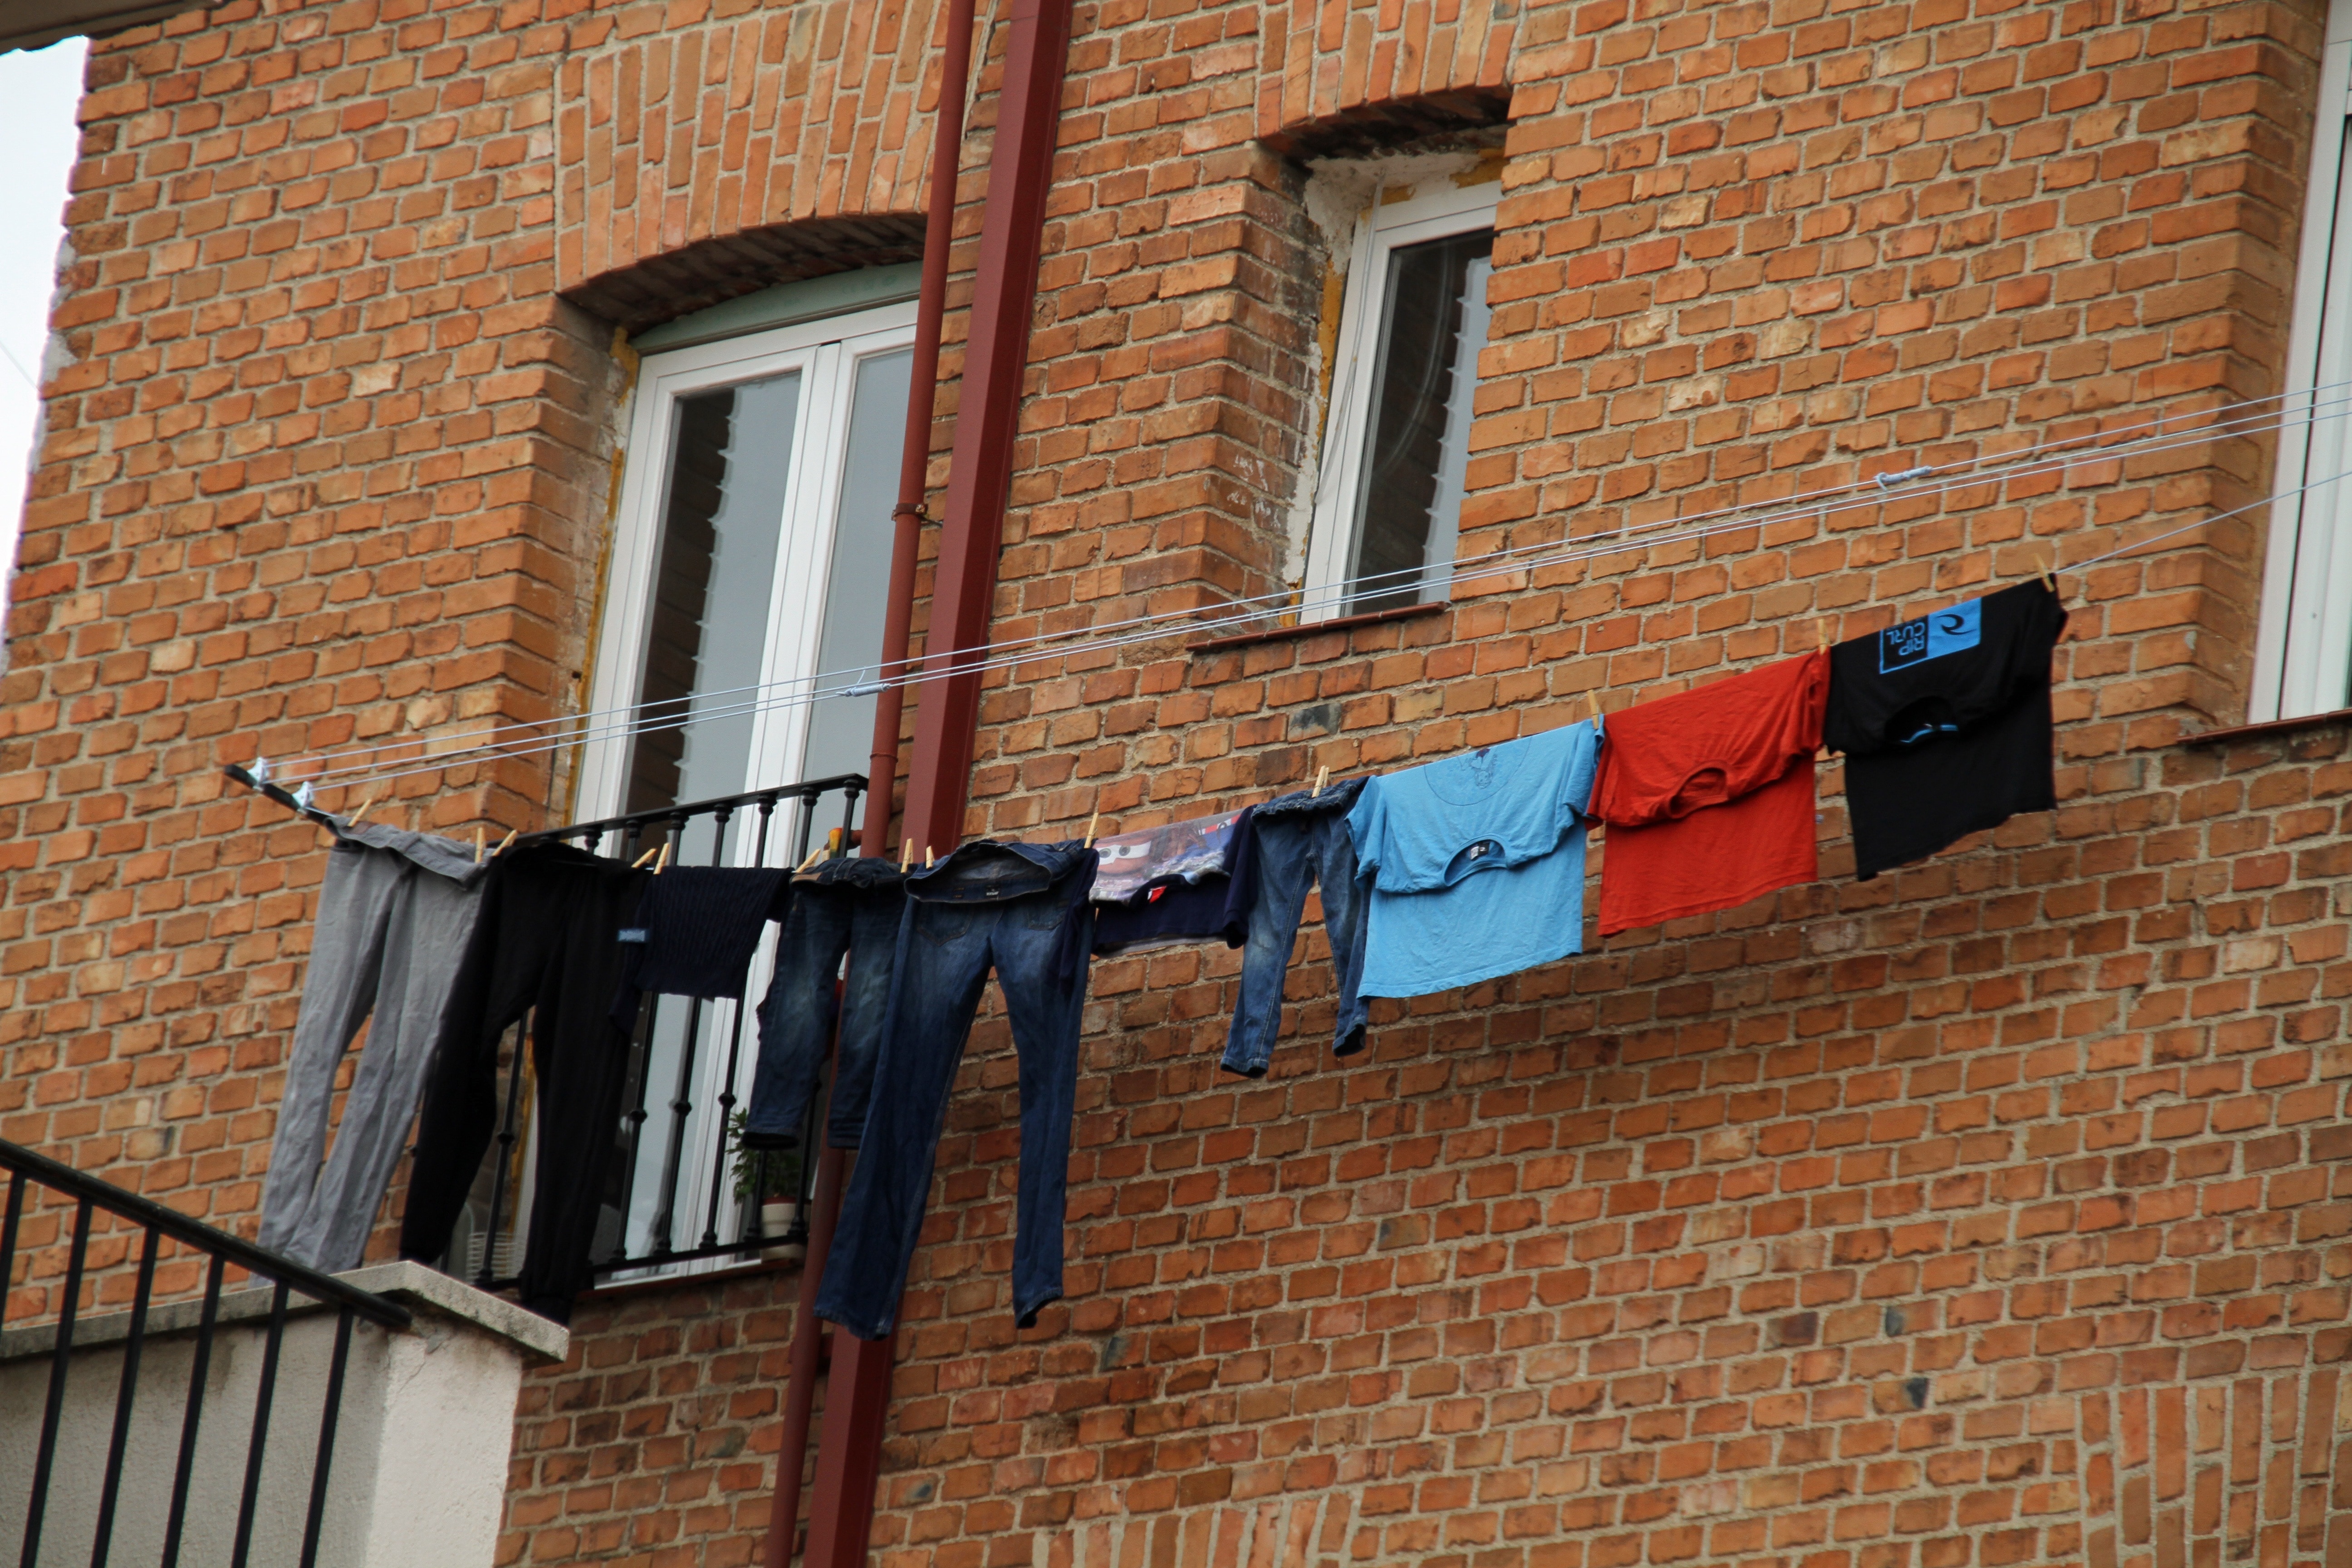 pants and clothes hanged on string beside brown high rise bricked made building during daytime